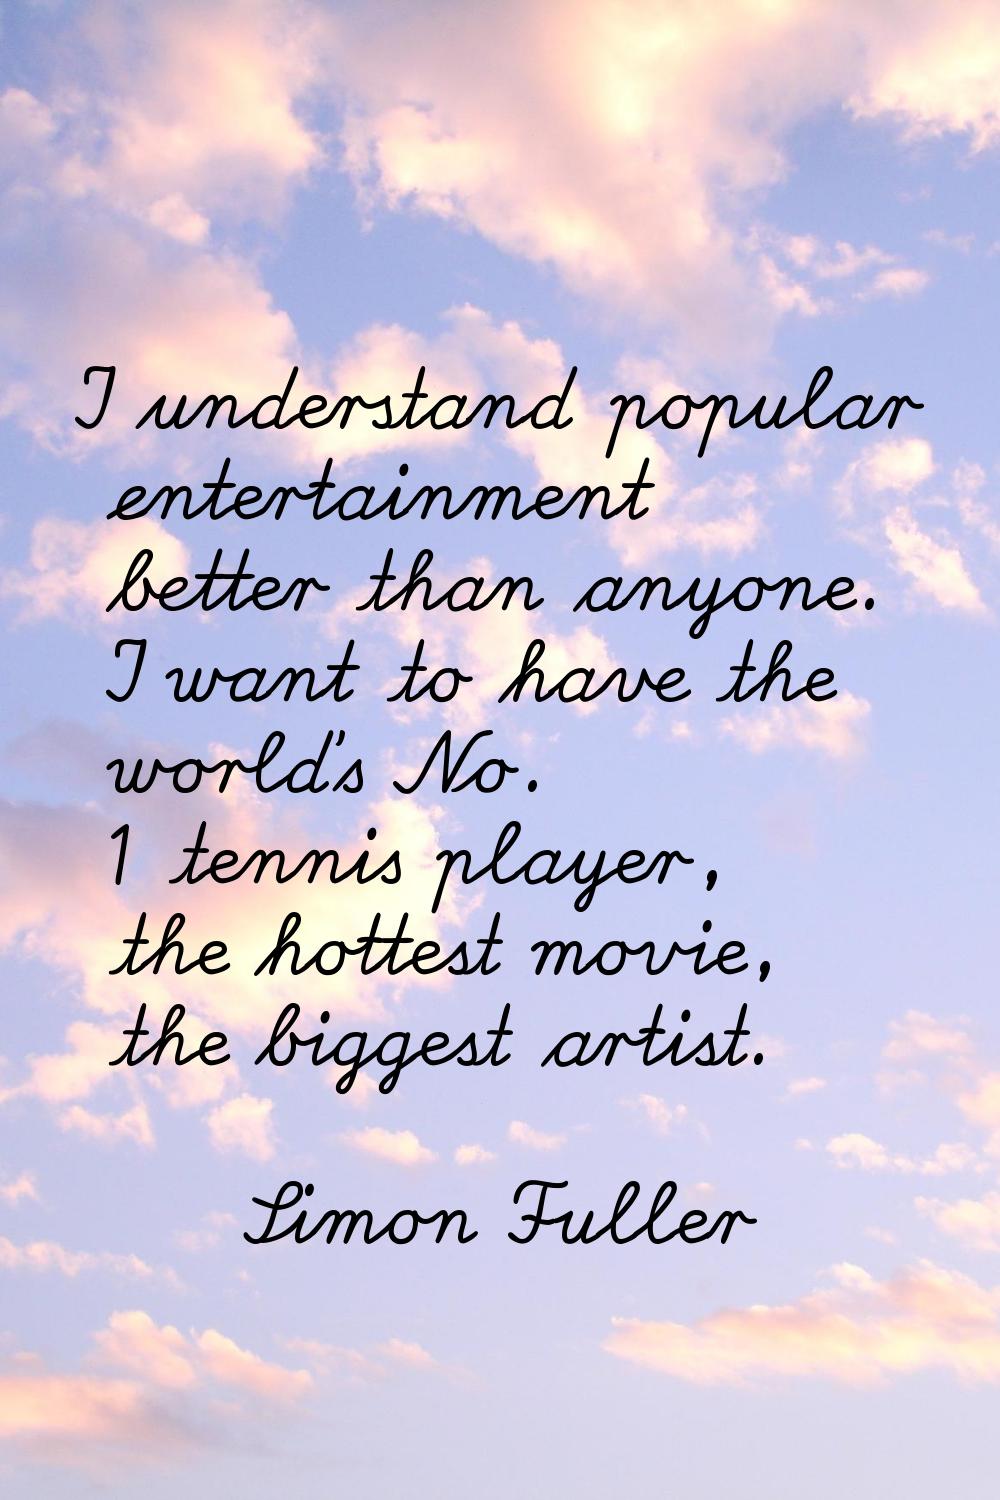 I understand popular entertainment better than anyone. I want to have the world's No. 1 tennis play